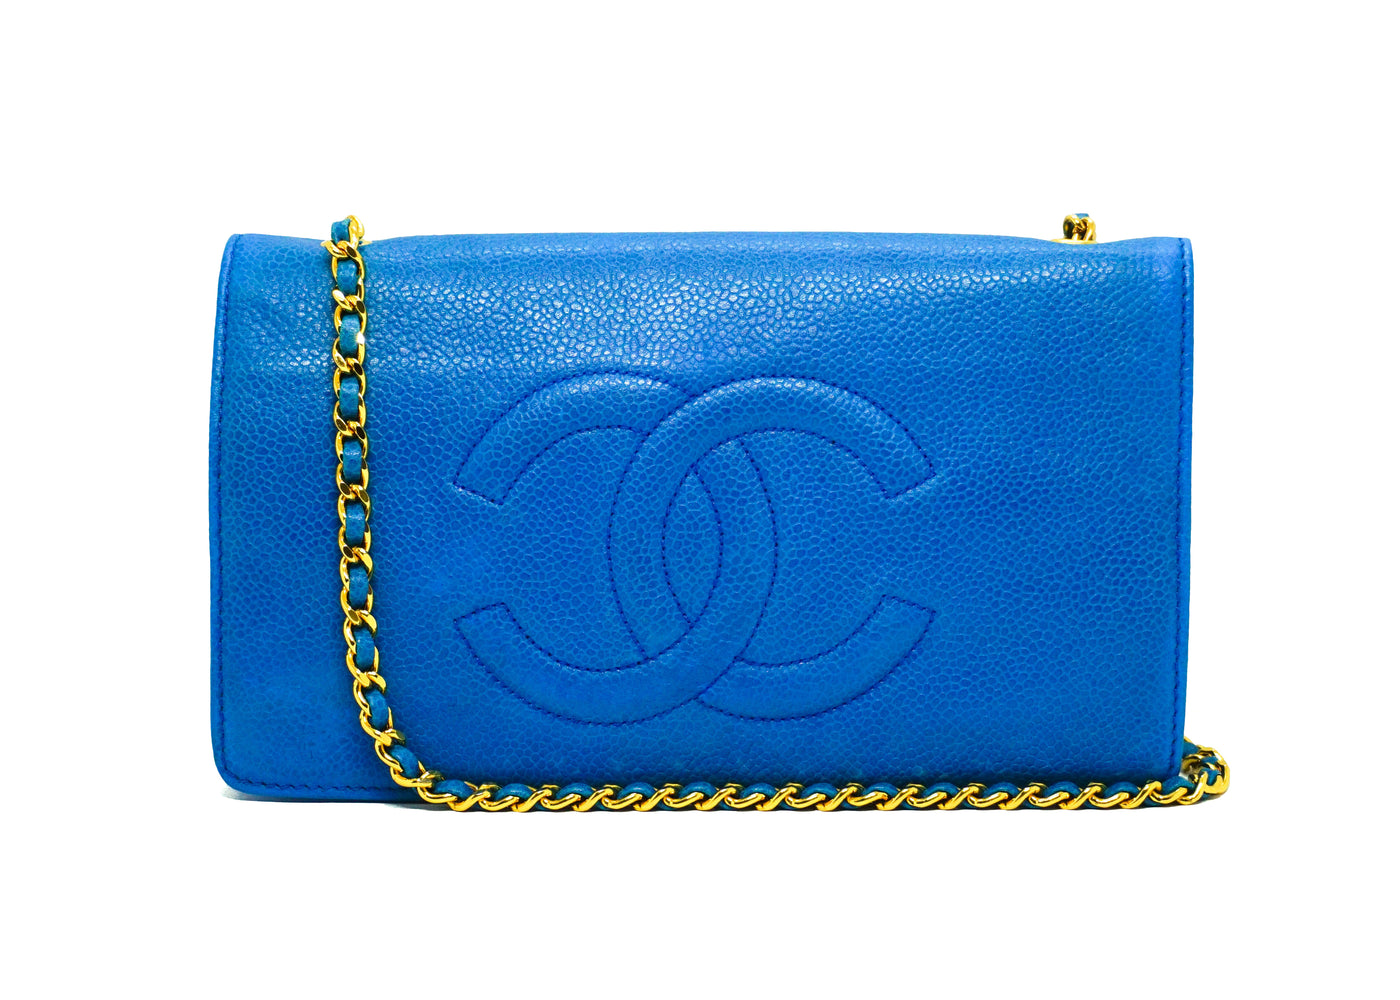 CHANEL, Bags, Chanel Wallet On Chain Royal Blue Like New